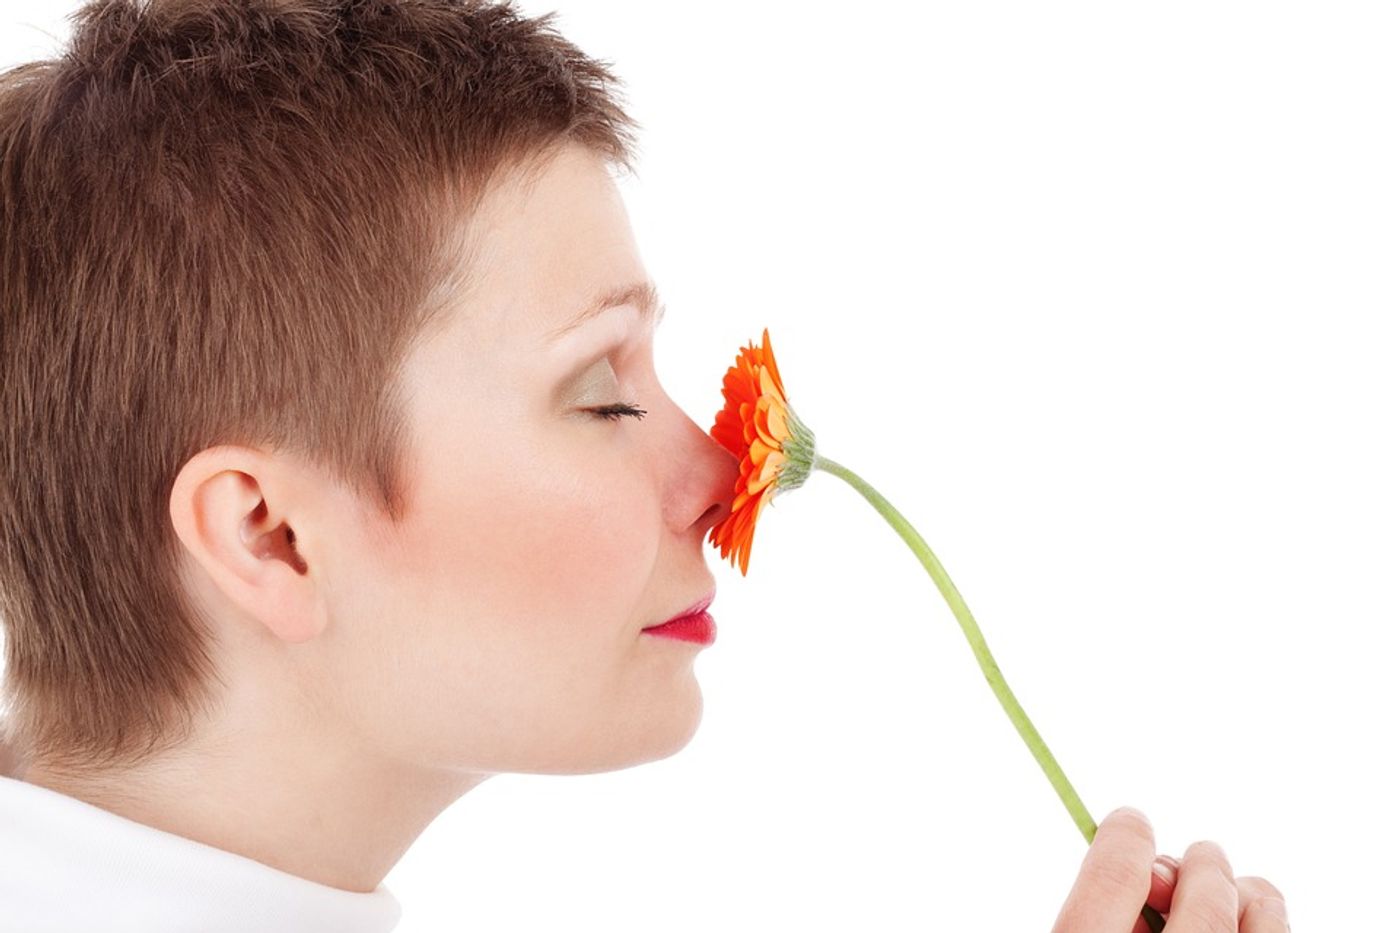 Smell tests may aid in the diagnosis of disorders like Alzheimer's disease. / Image credit: Pixabay